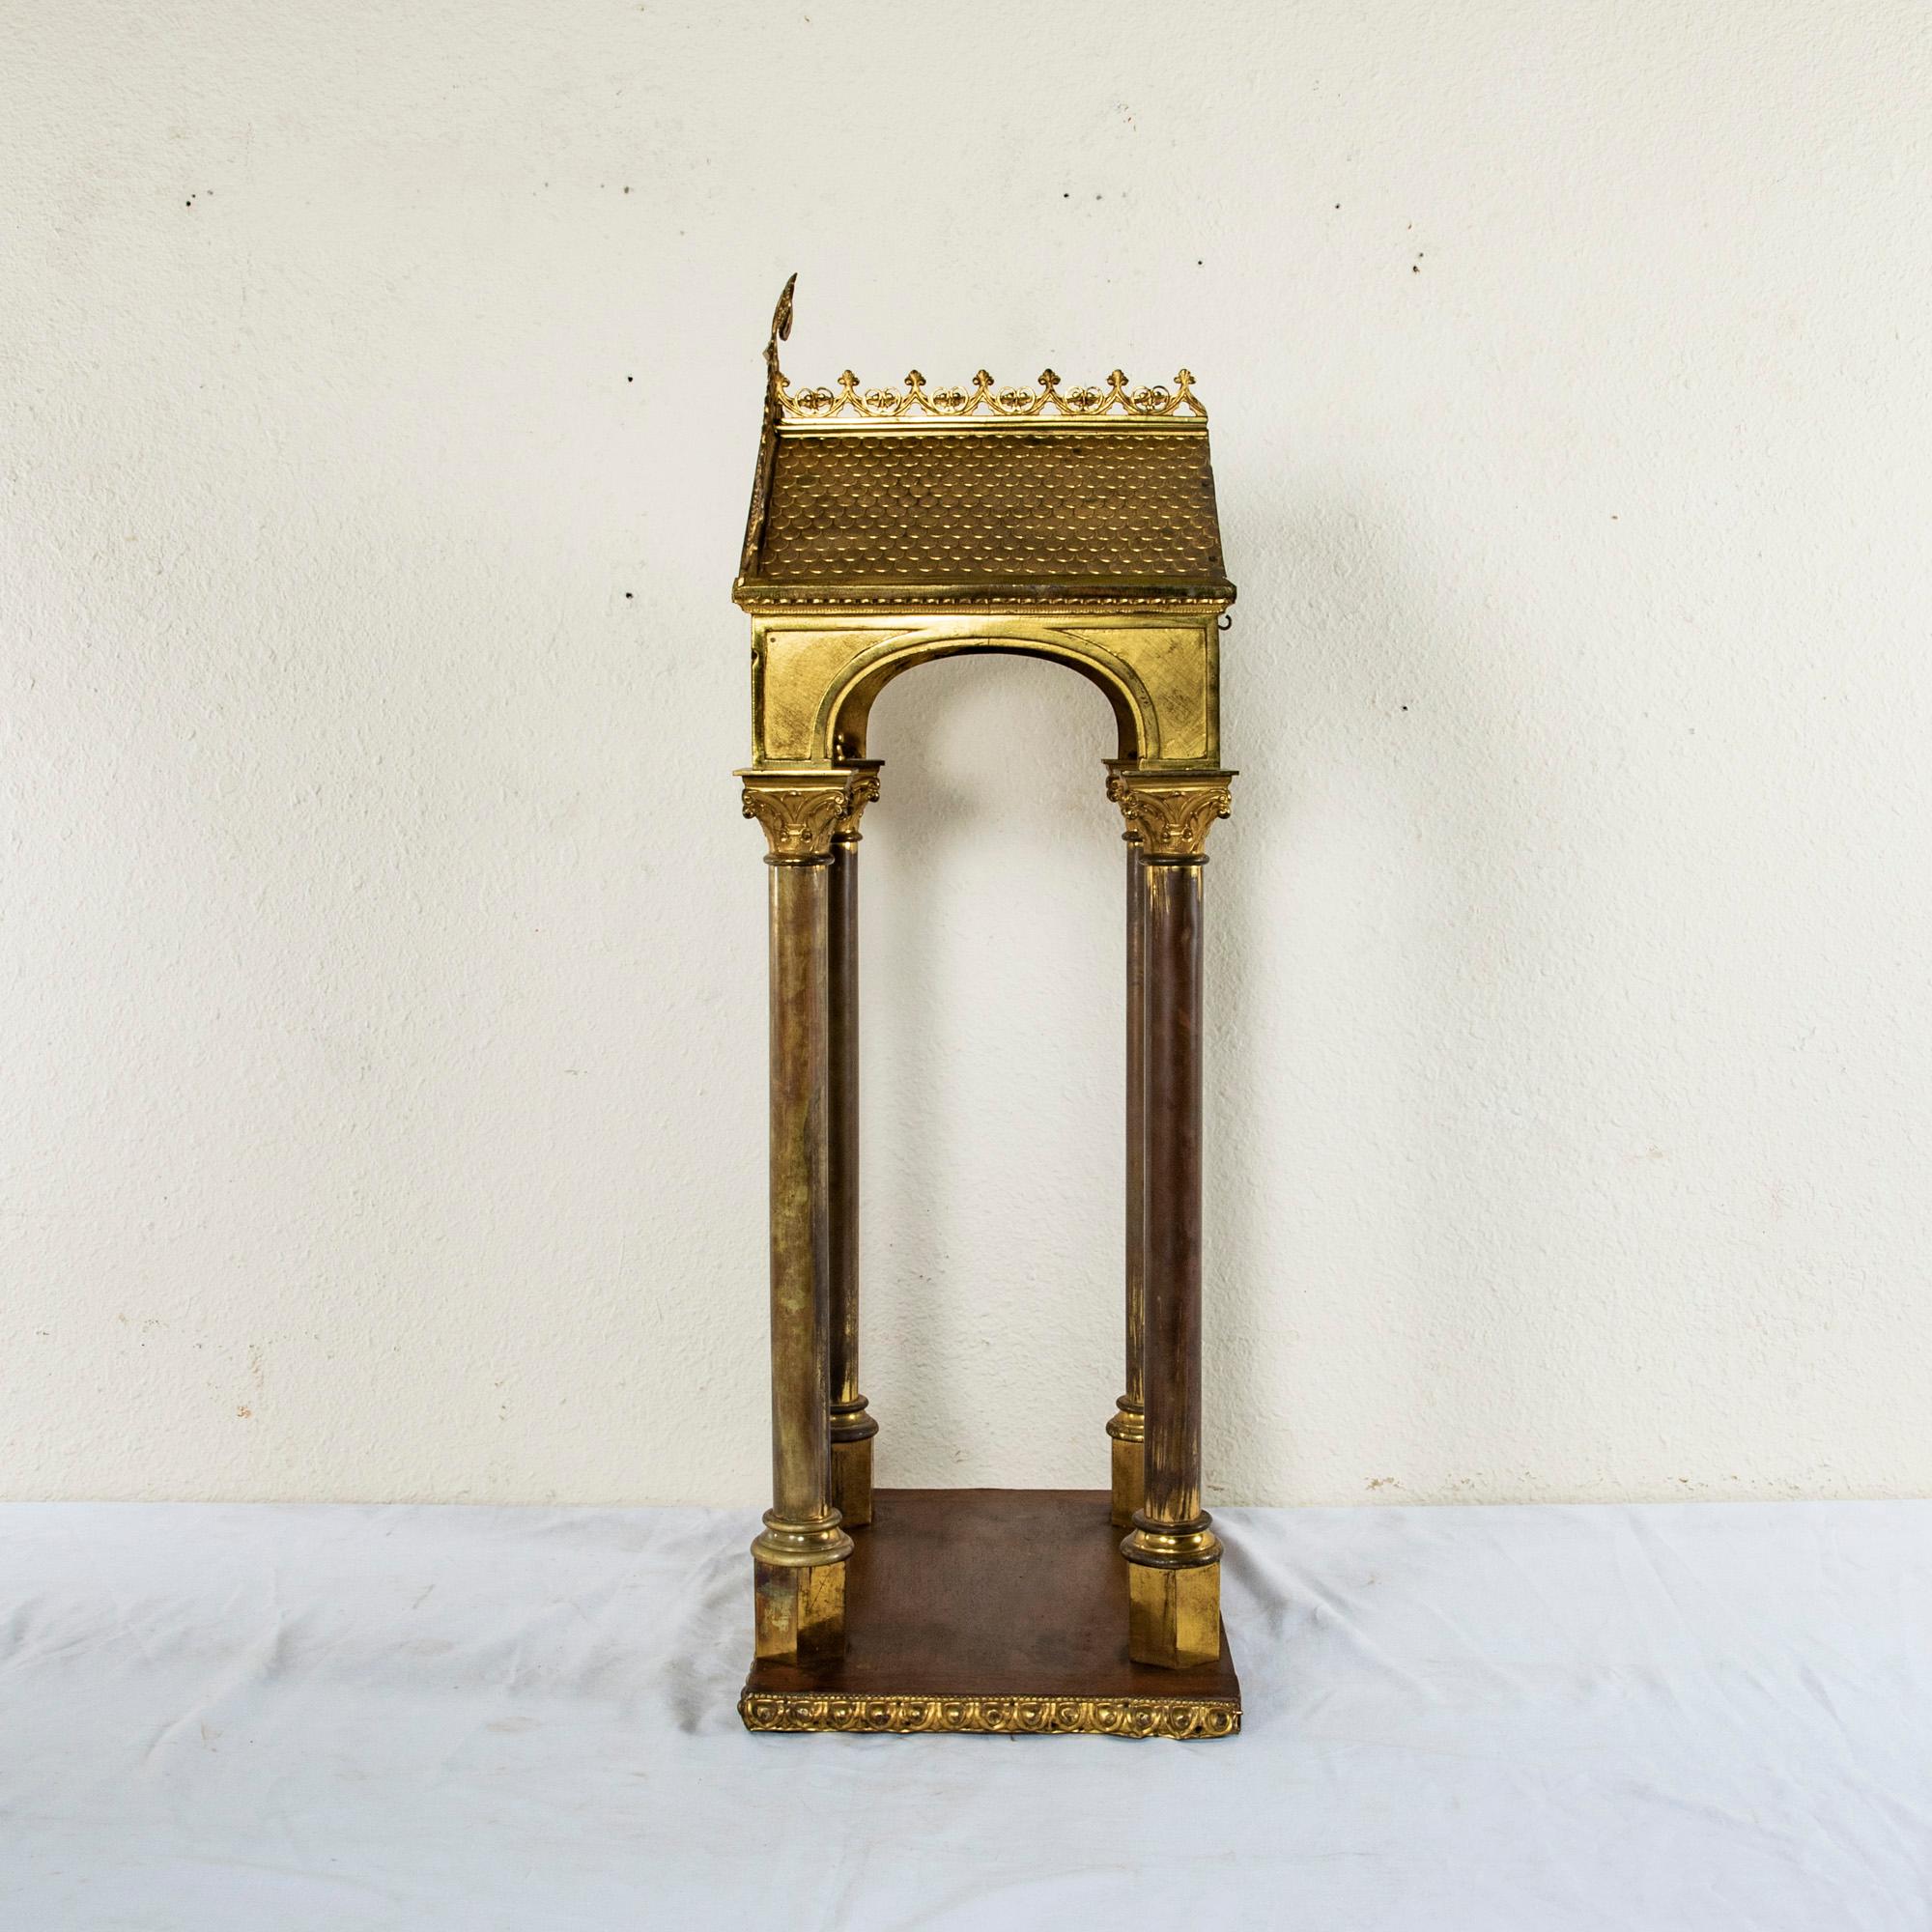 Early 20th Century Italian Gilt Brass and Wooden Altar or Sculpture Stand In Good Condition For Sale In Fayetteville, AR